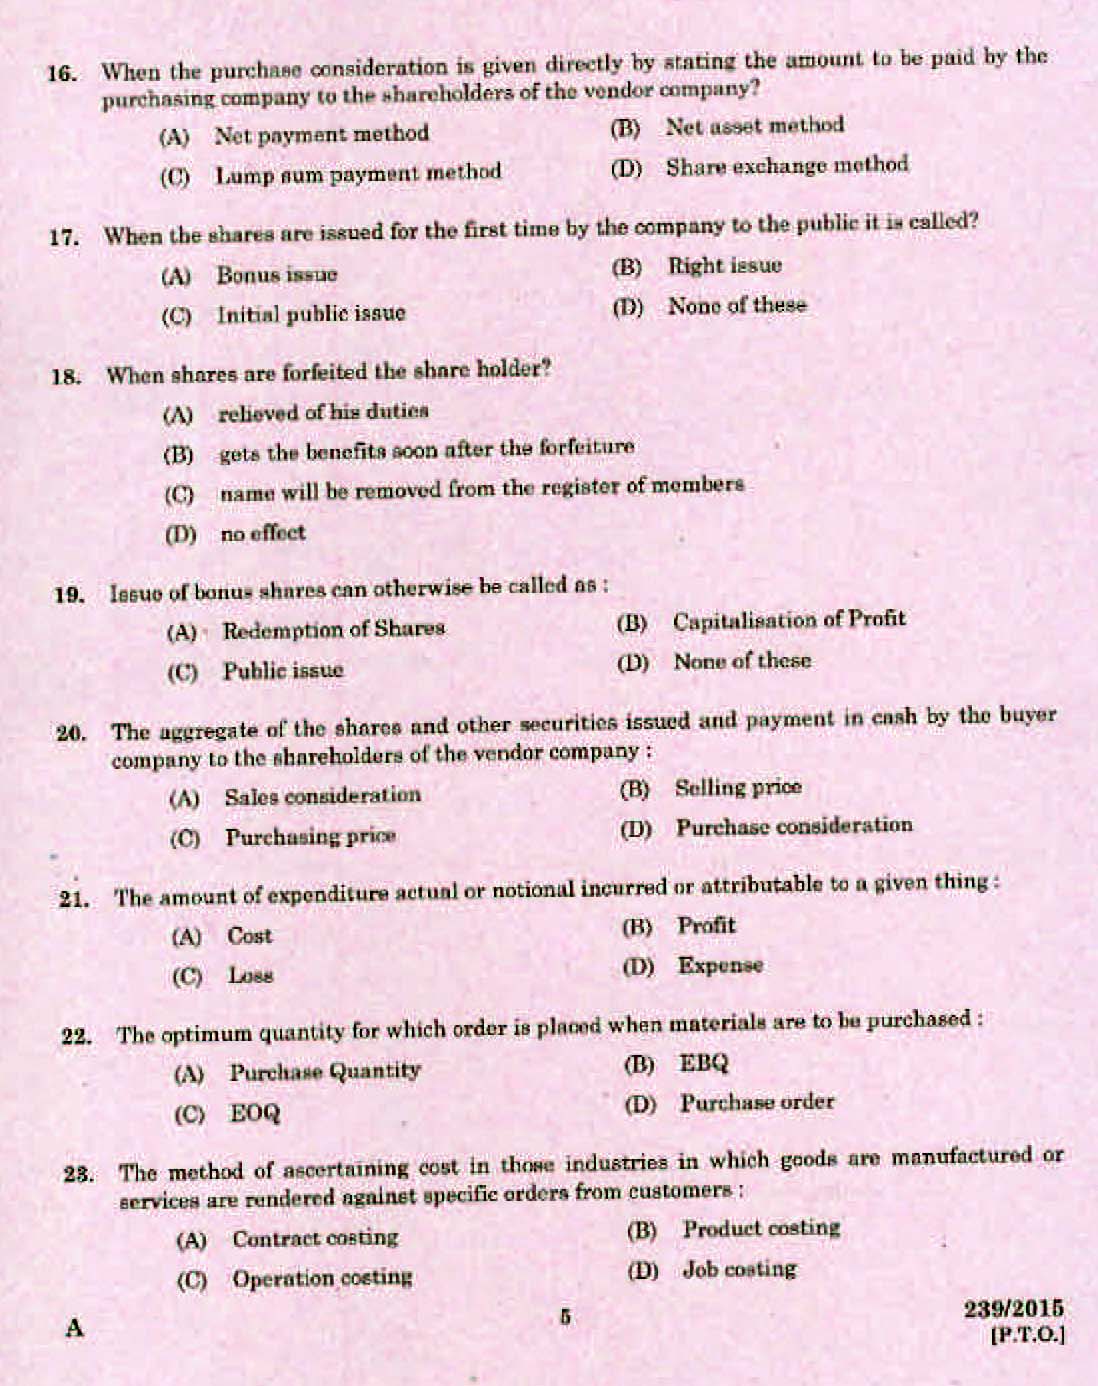 Kerala PSC Accounts Officer OMR Exam 2015 Question Paper Code 2392015 3